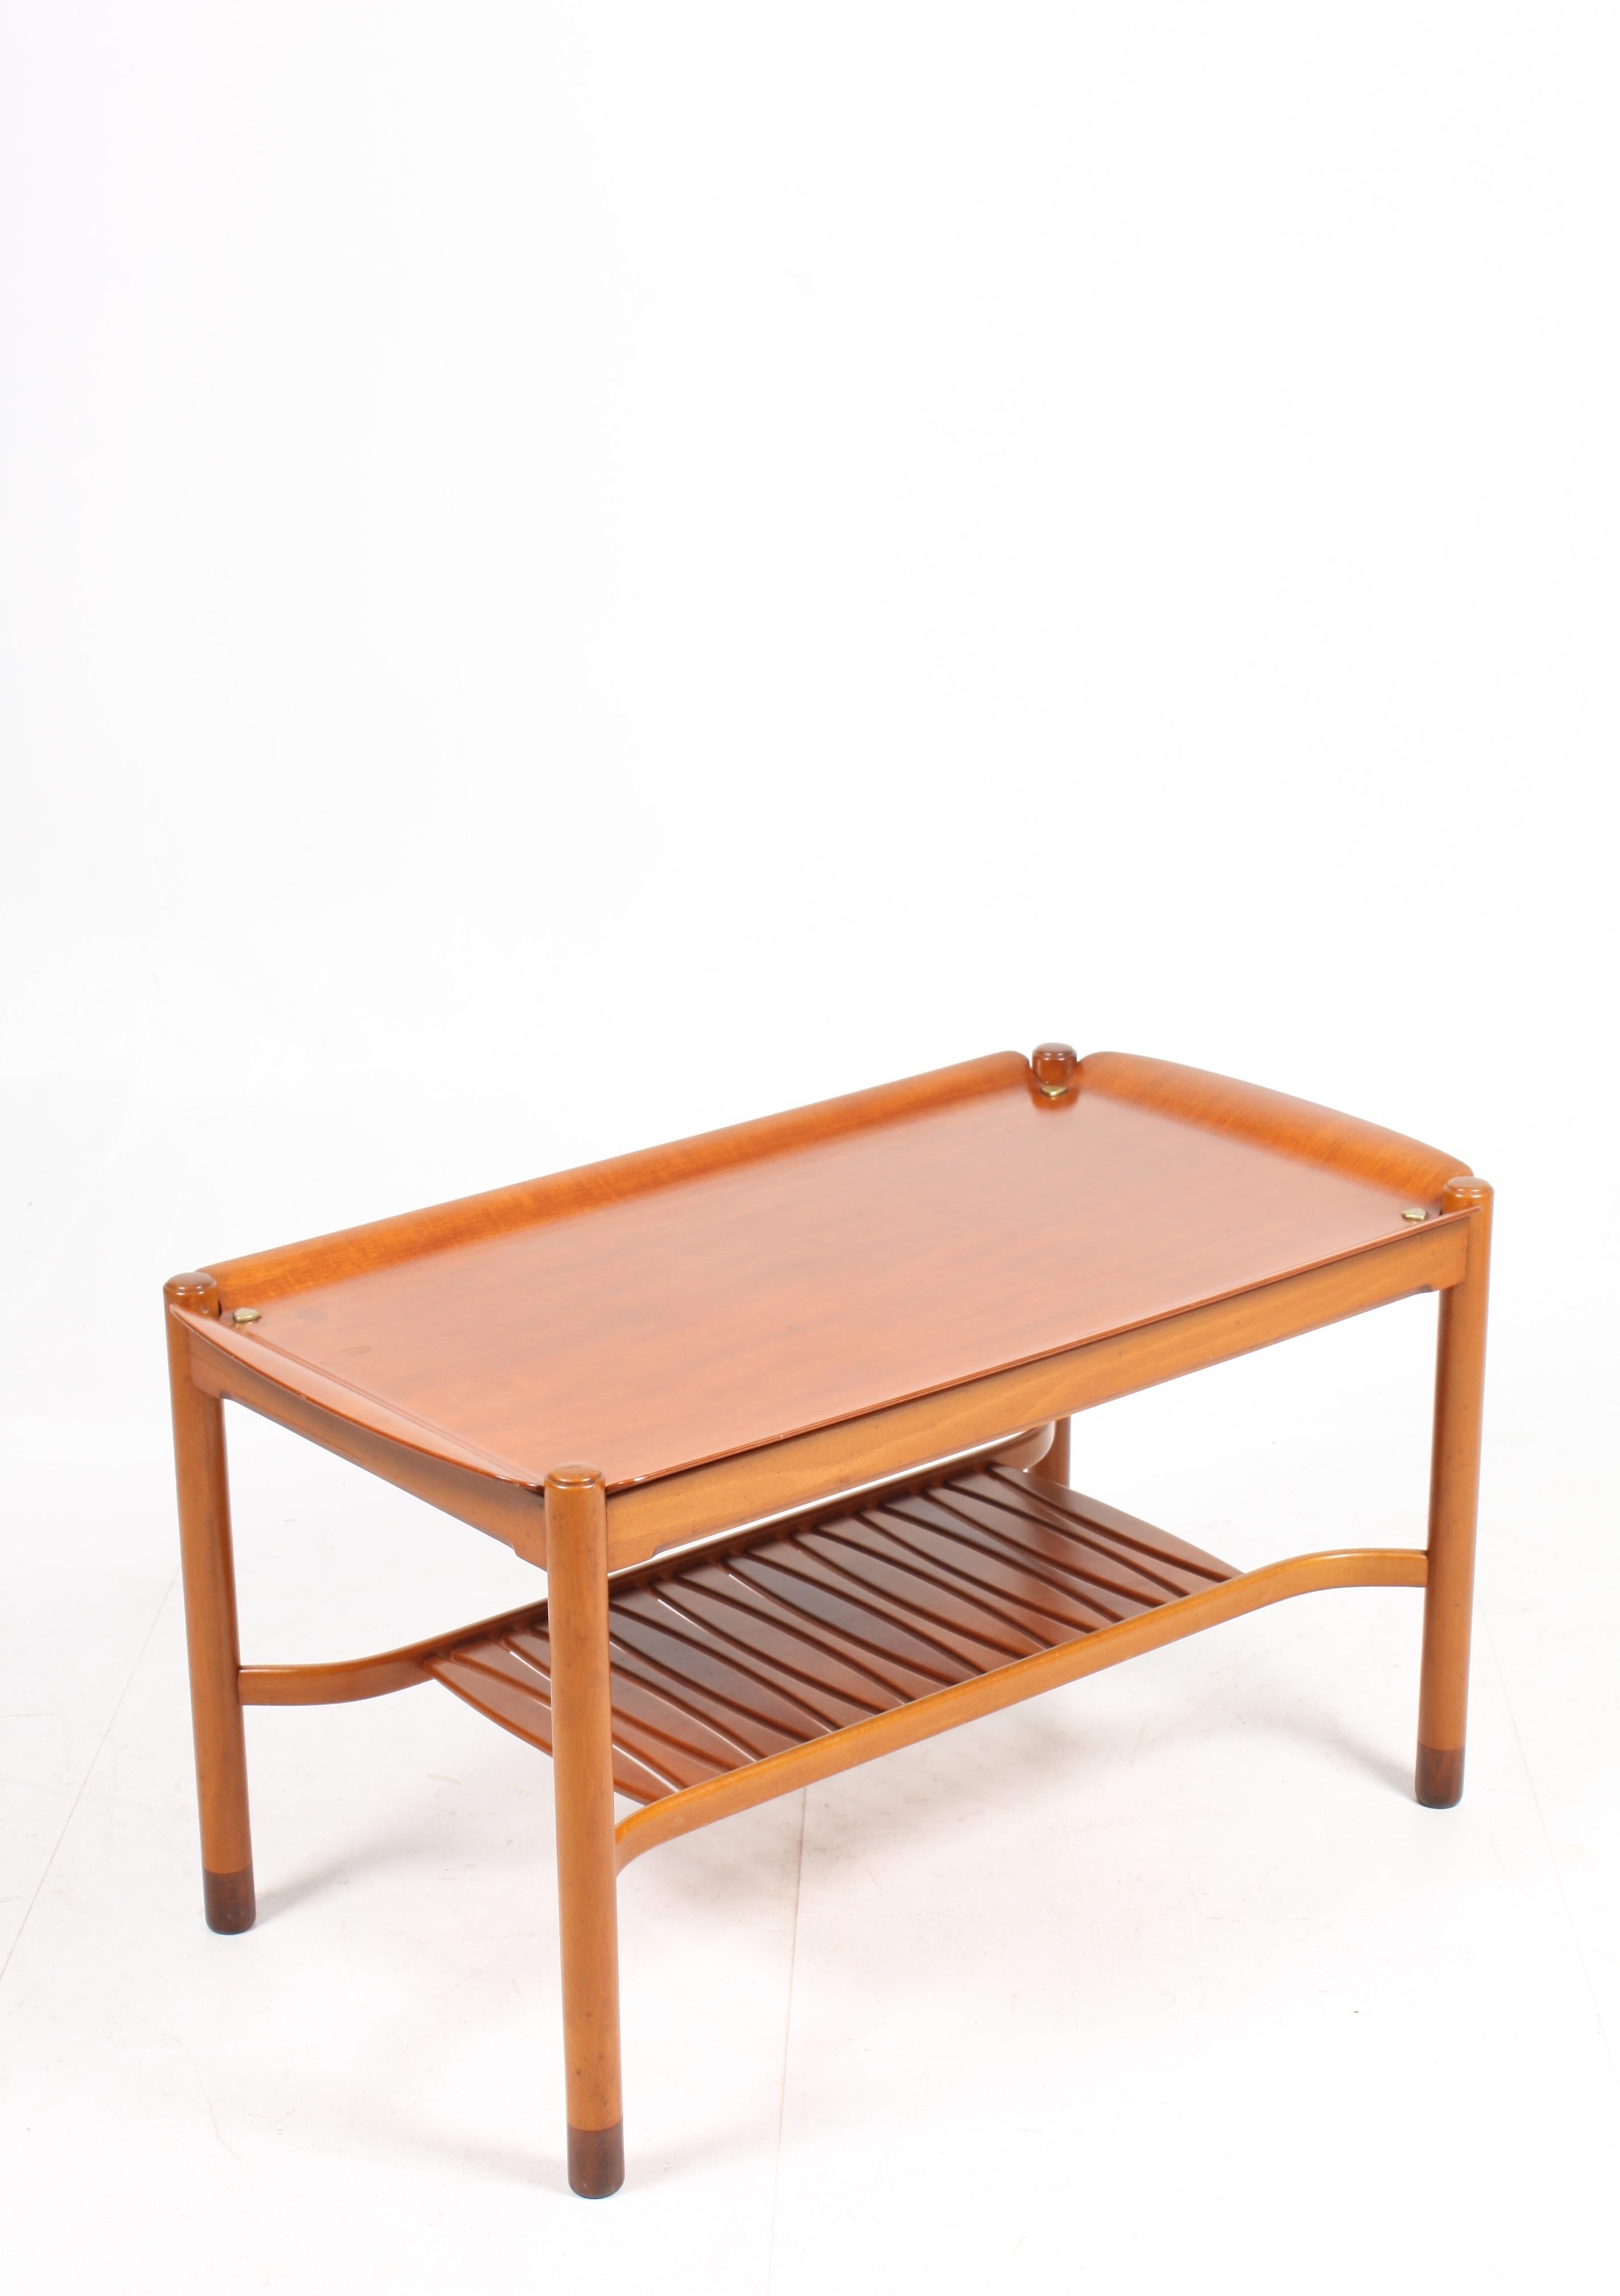 Small low table in mahogany designed by David Rosen for Nordiska Kompaniet cabinetmakers. Made in Sweden in the 1950s. Great original condition.